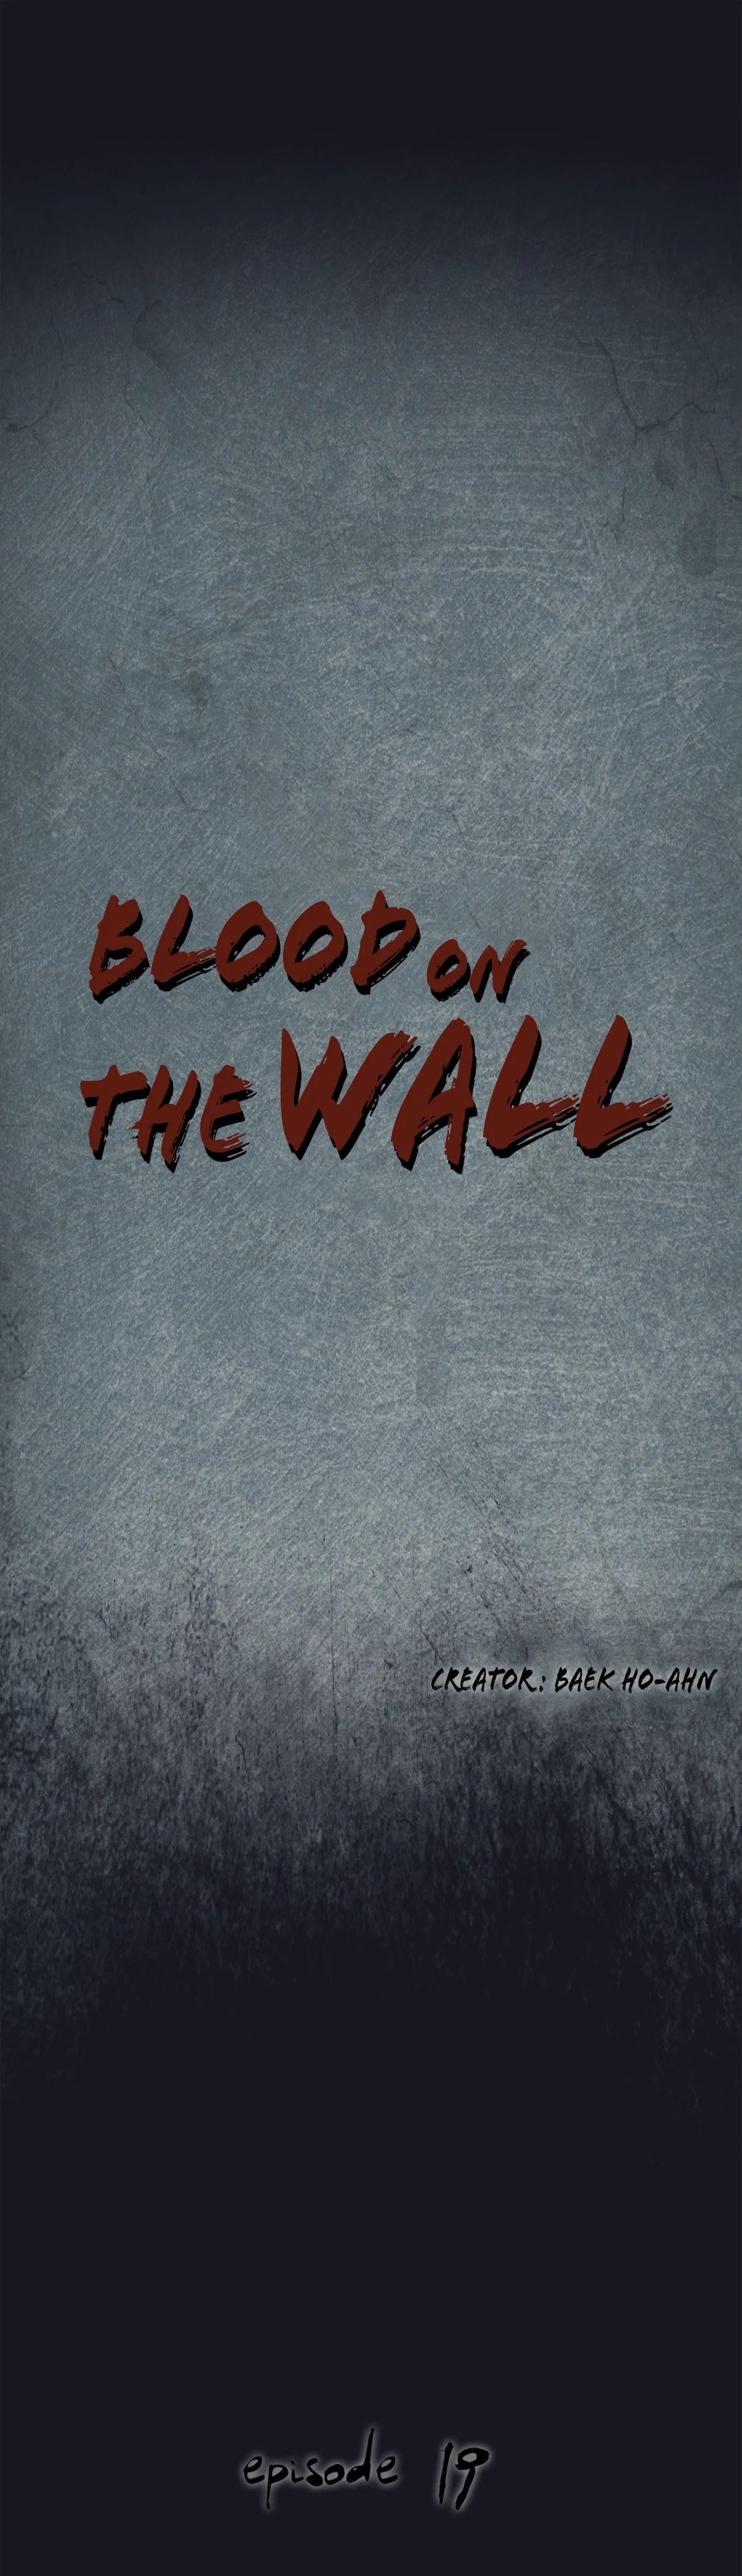 blood-on-the-wall-chap-19-4